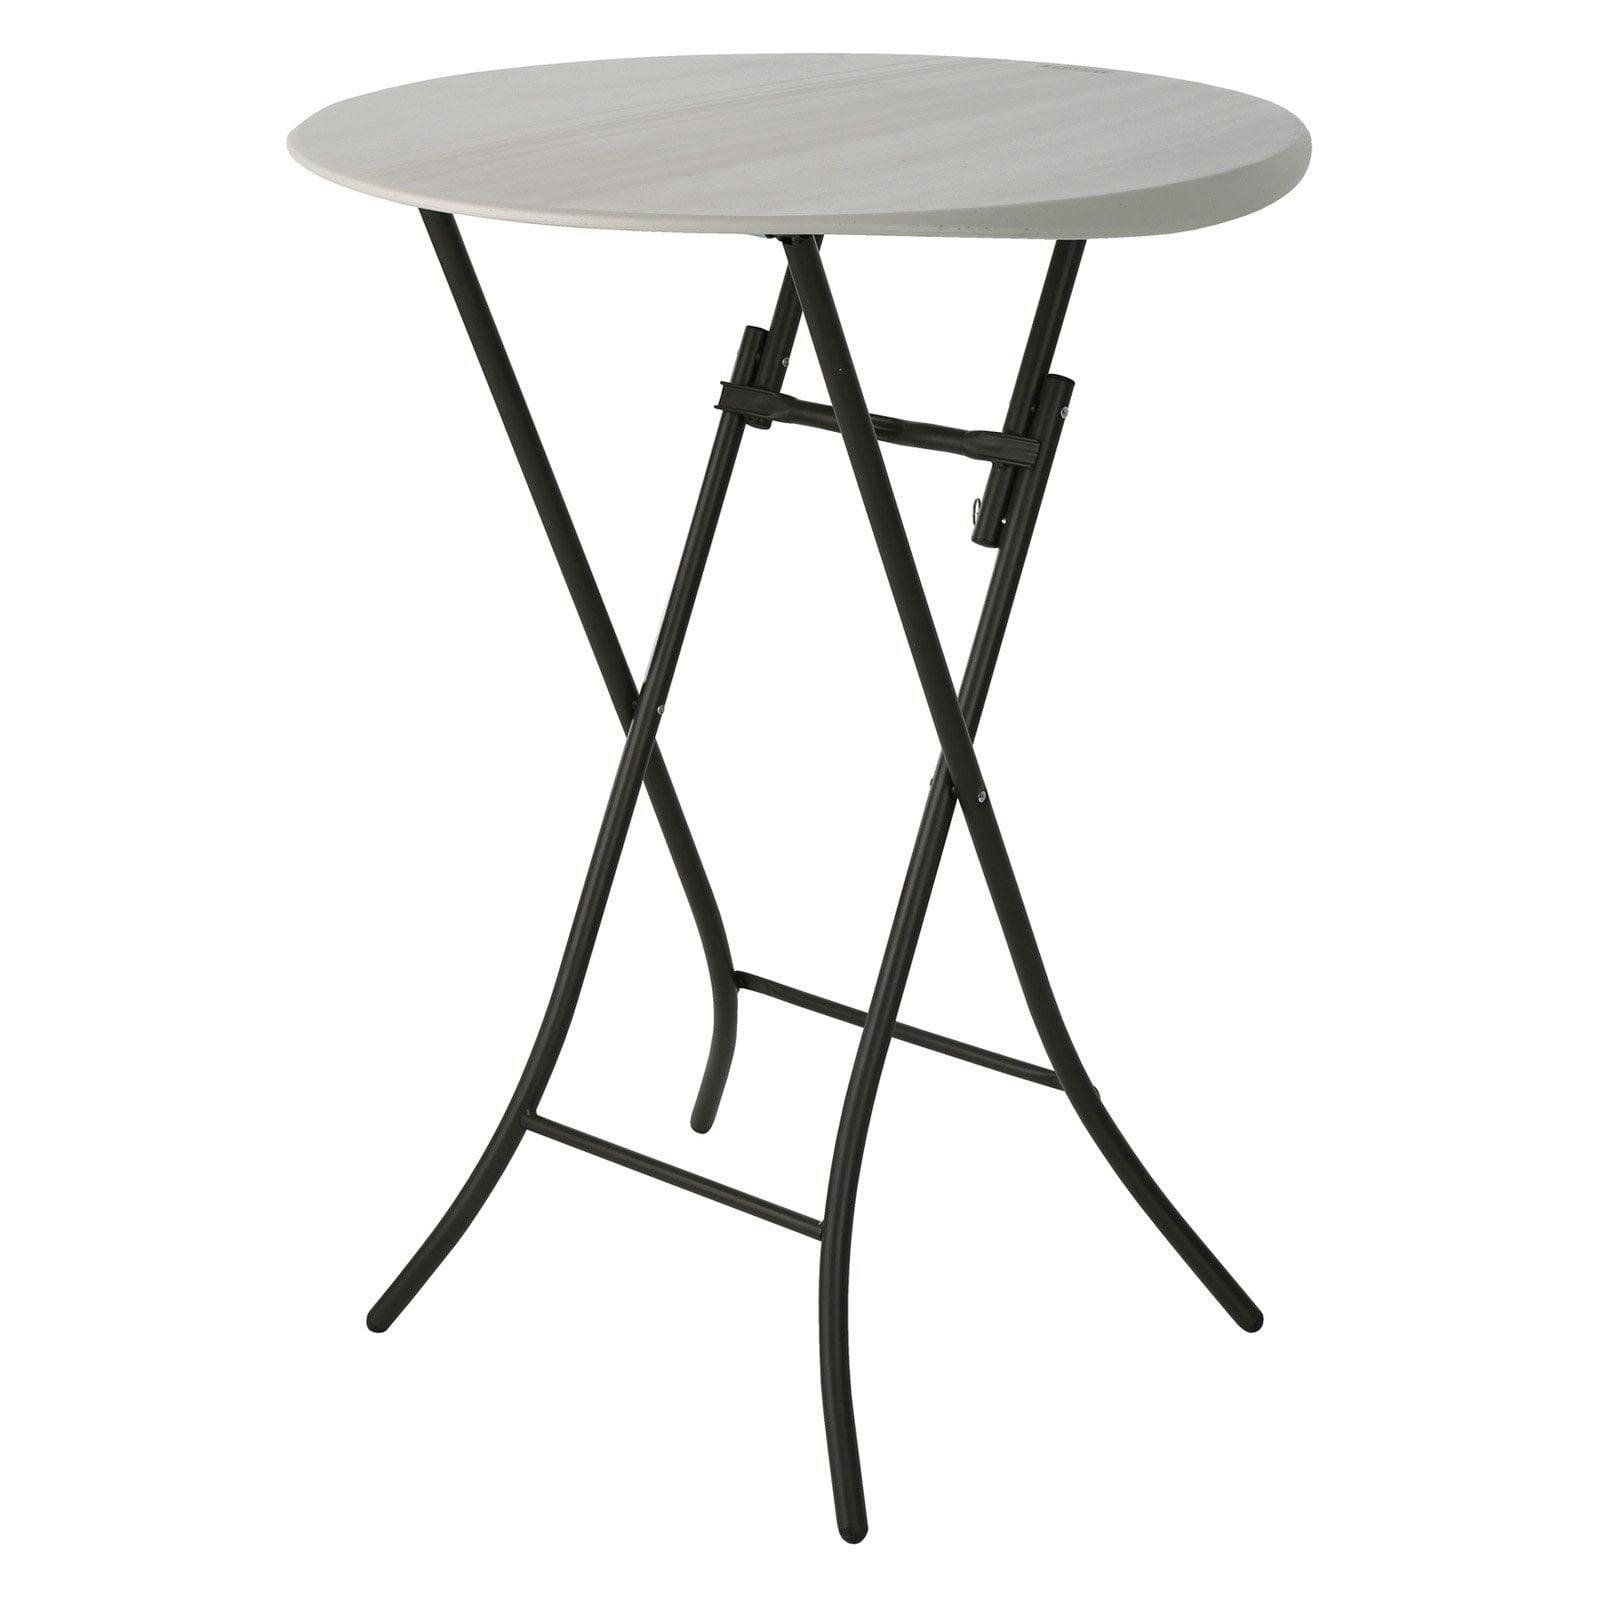 Almond HDPE 33" Round Bistro Table with Bronze Steel Legs